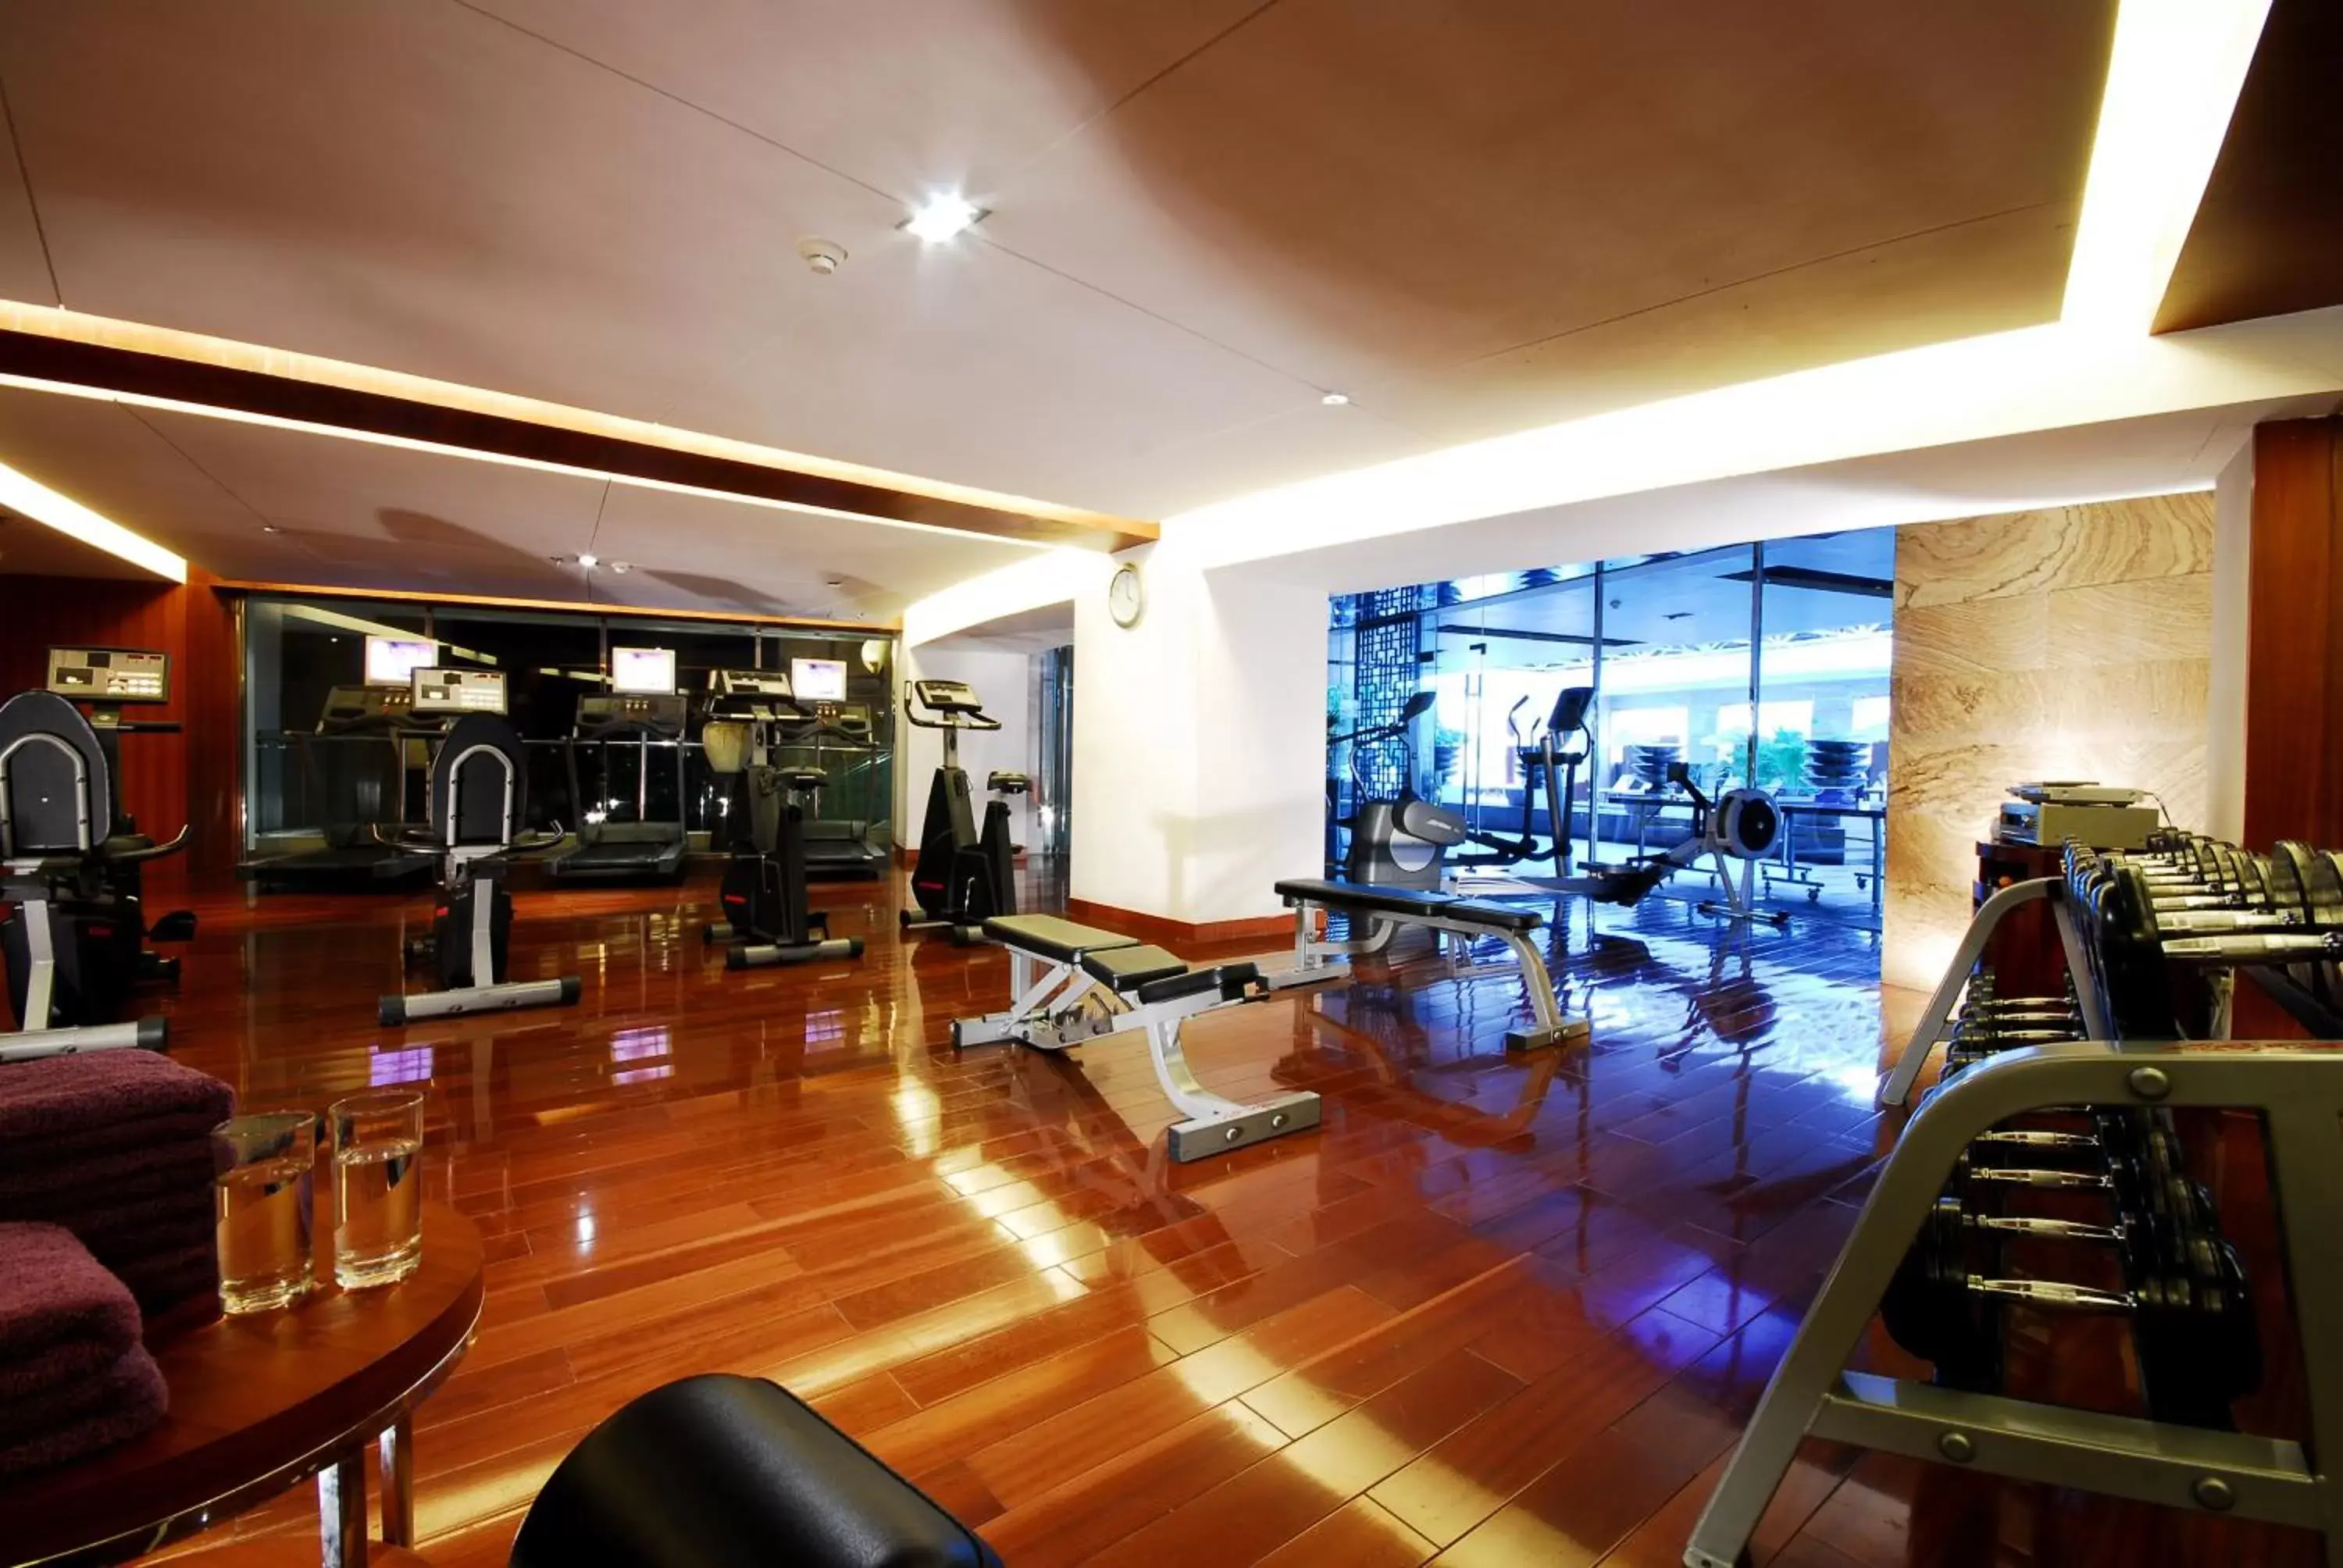 Fitness centre/facilities, Fitness Center/Facilities in Sofitel Xi'an On Renmin Square